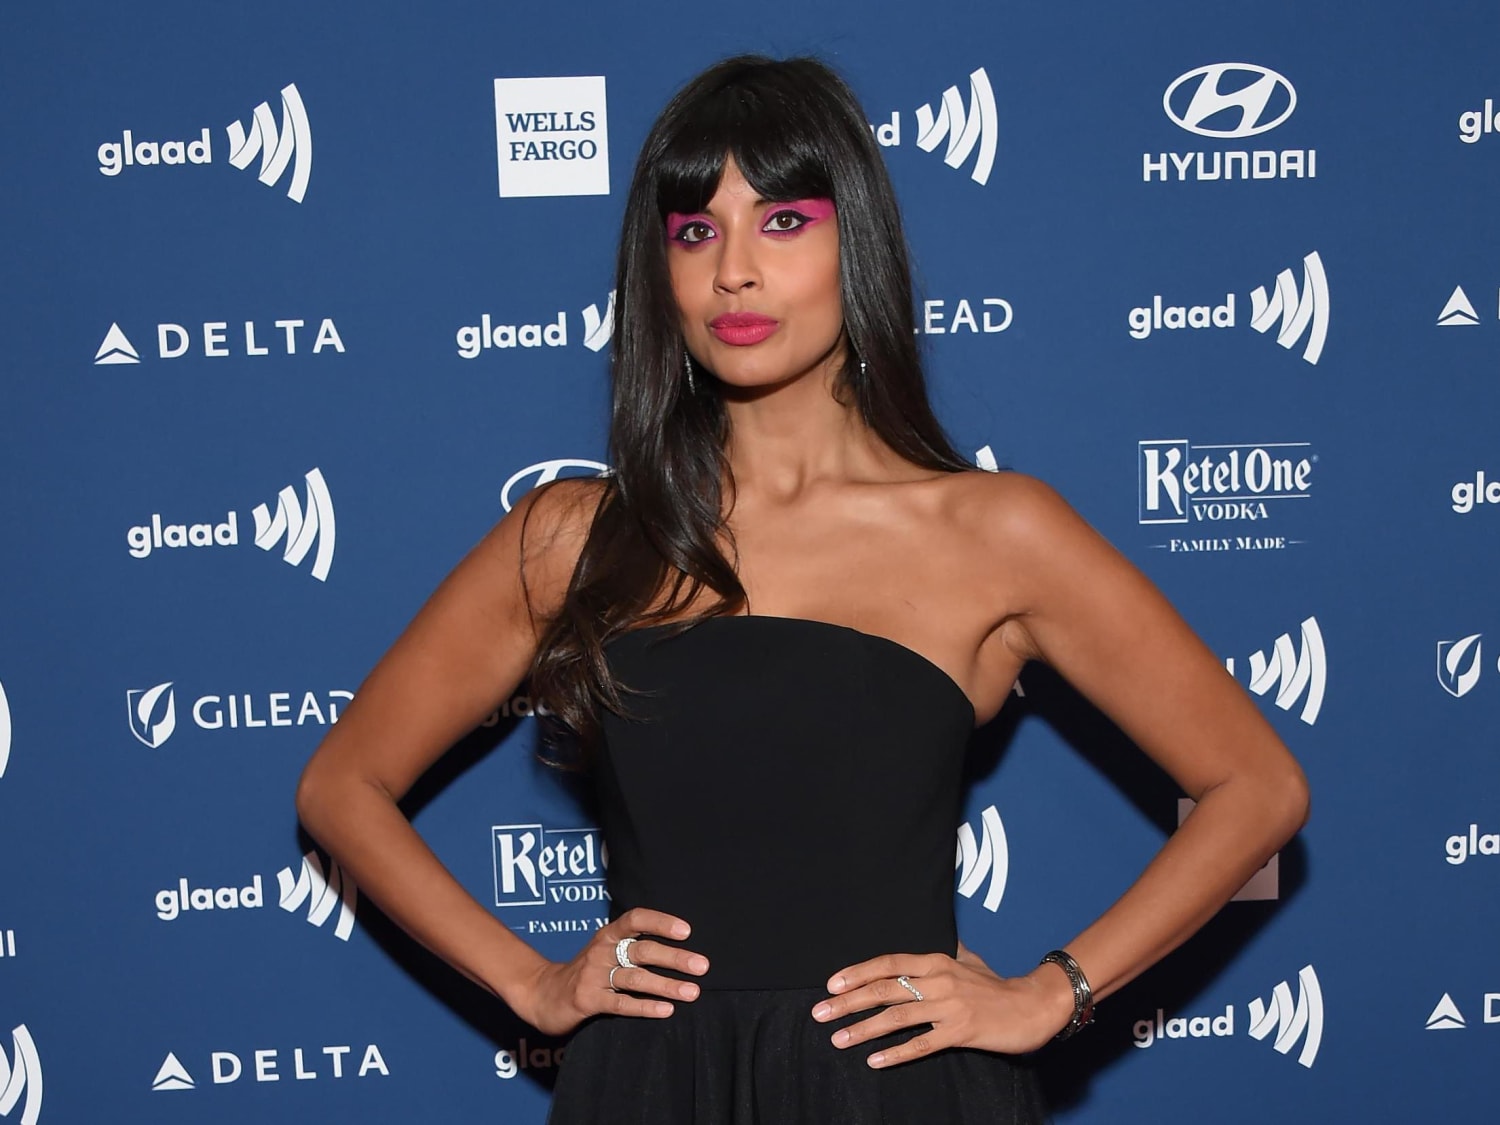 Jameela Jamil says she tried to take her own life six years ago